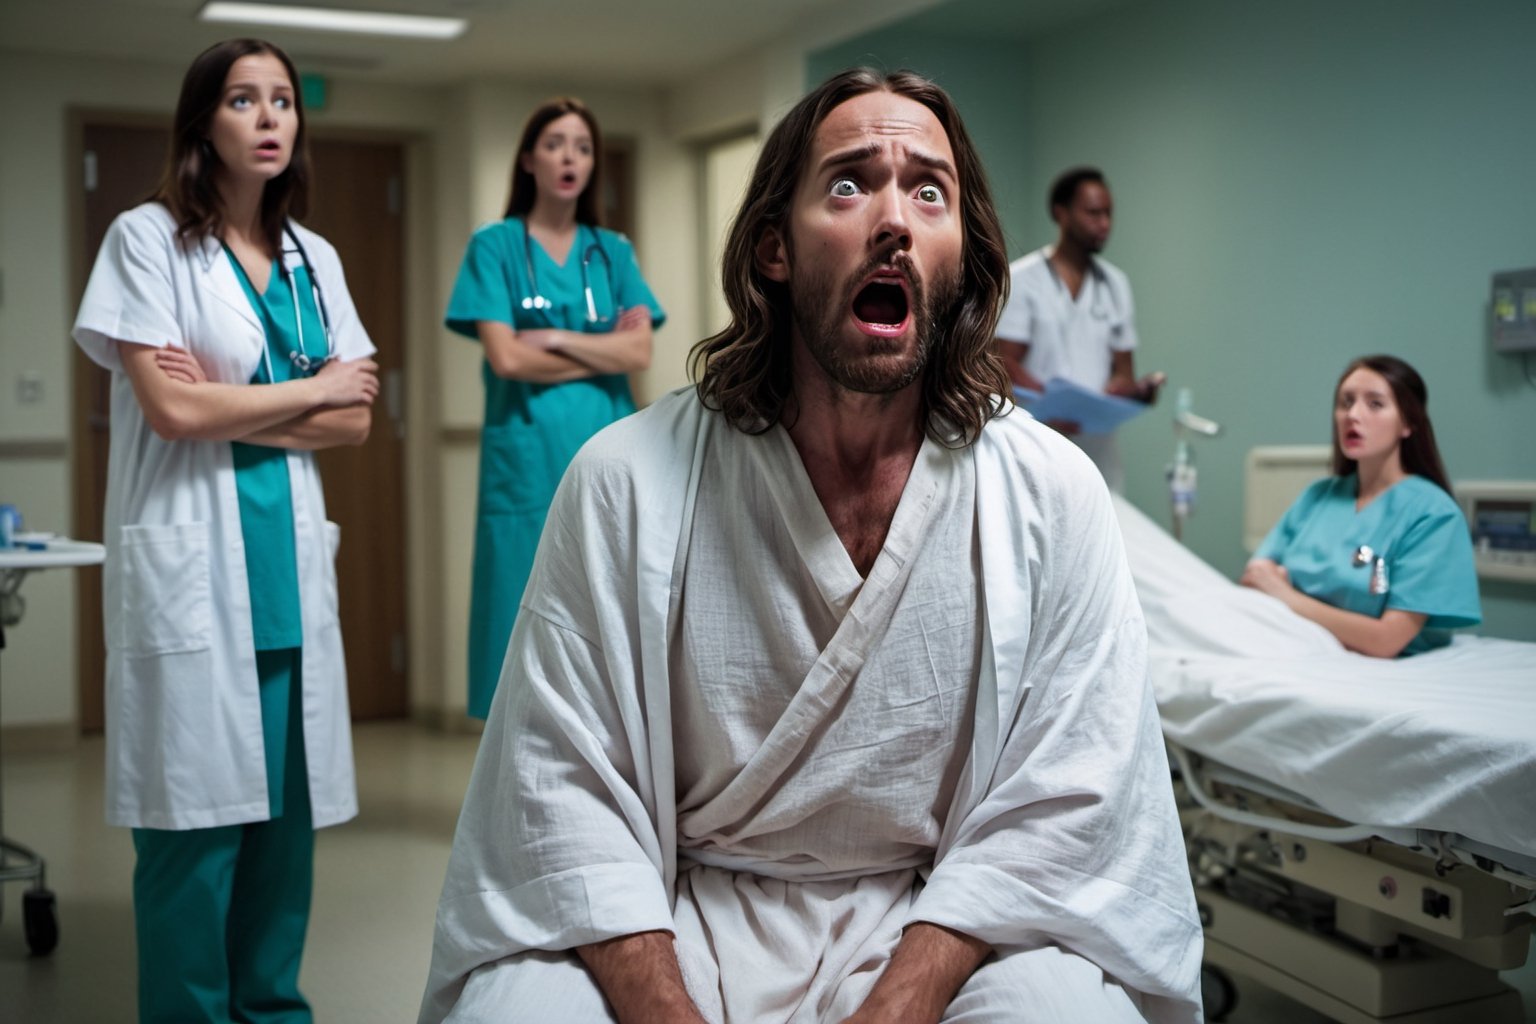 Jesus, wrapped in white linen, sitting up abruptly in a dimly lit hospital. His eyes are wide with surprise as those around him, doctor and nurses, with shocked and horrified expressions